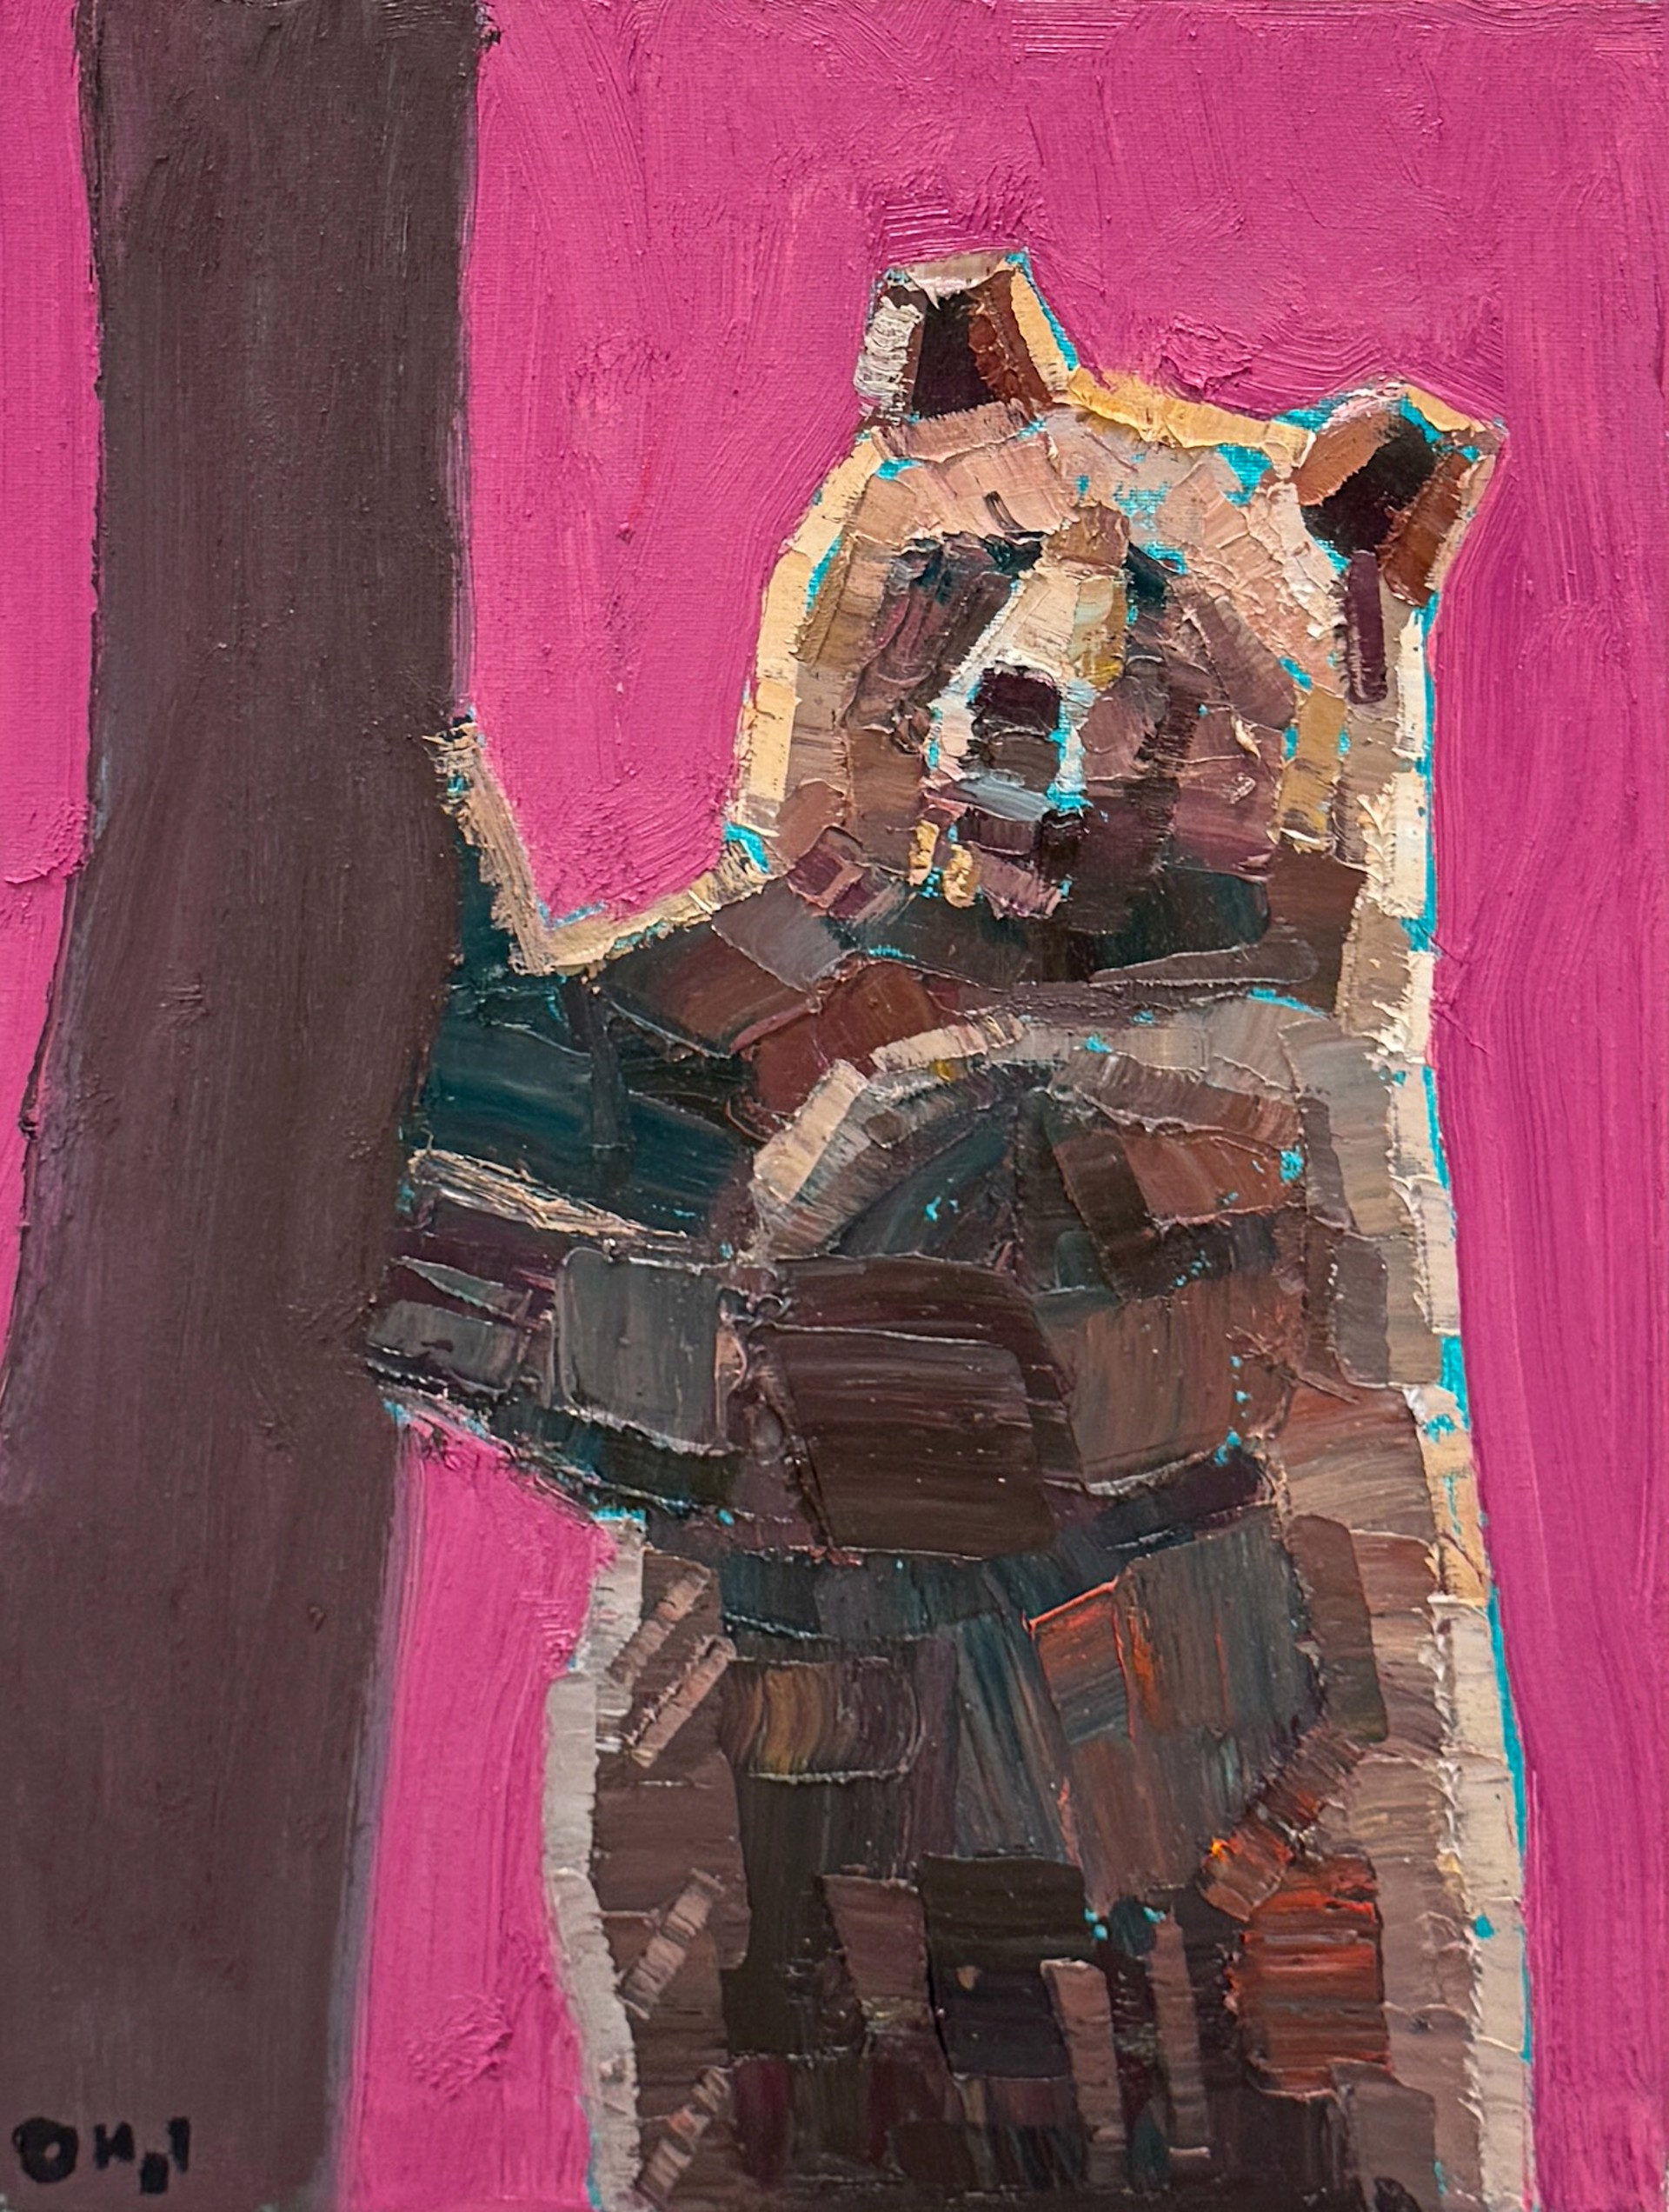 Original Oil Painting By Aaron Hazel Featuring A Grizzly Bear On A Pink Background